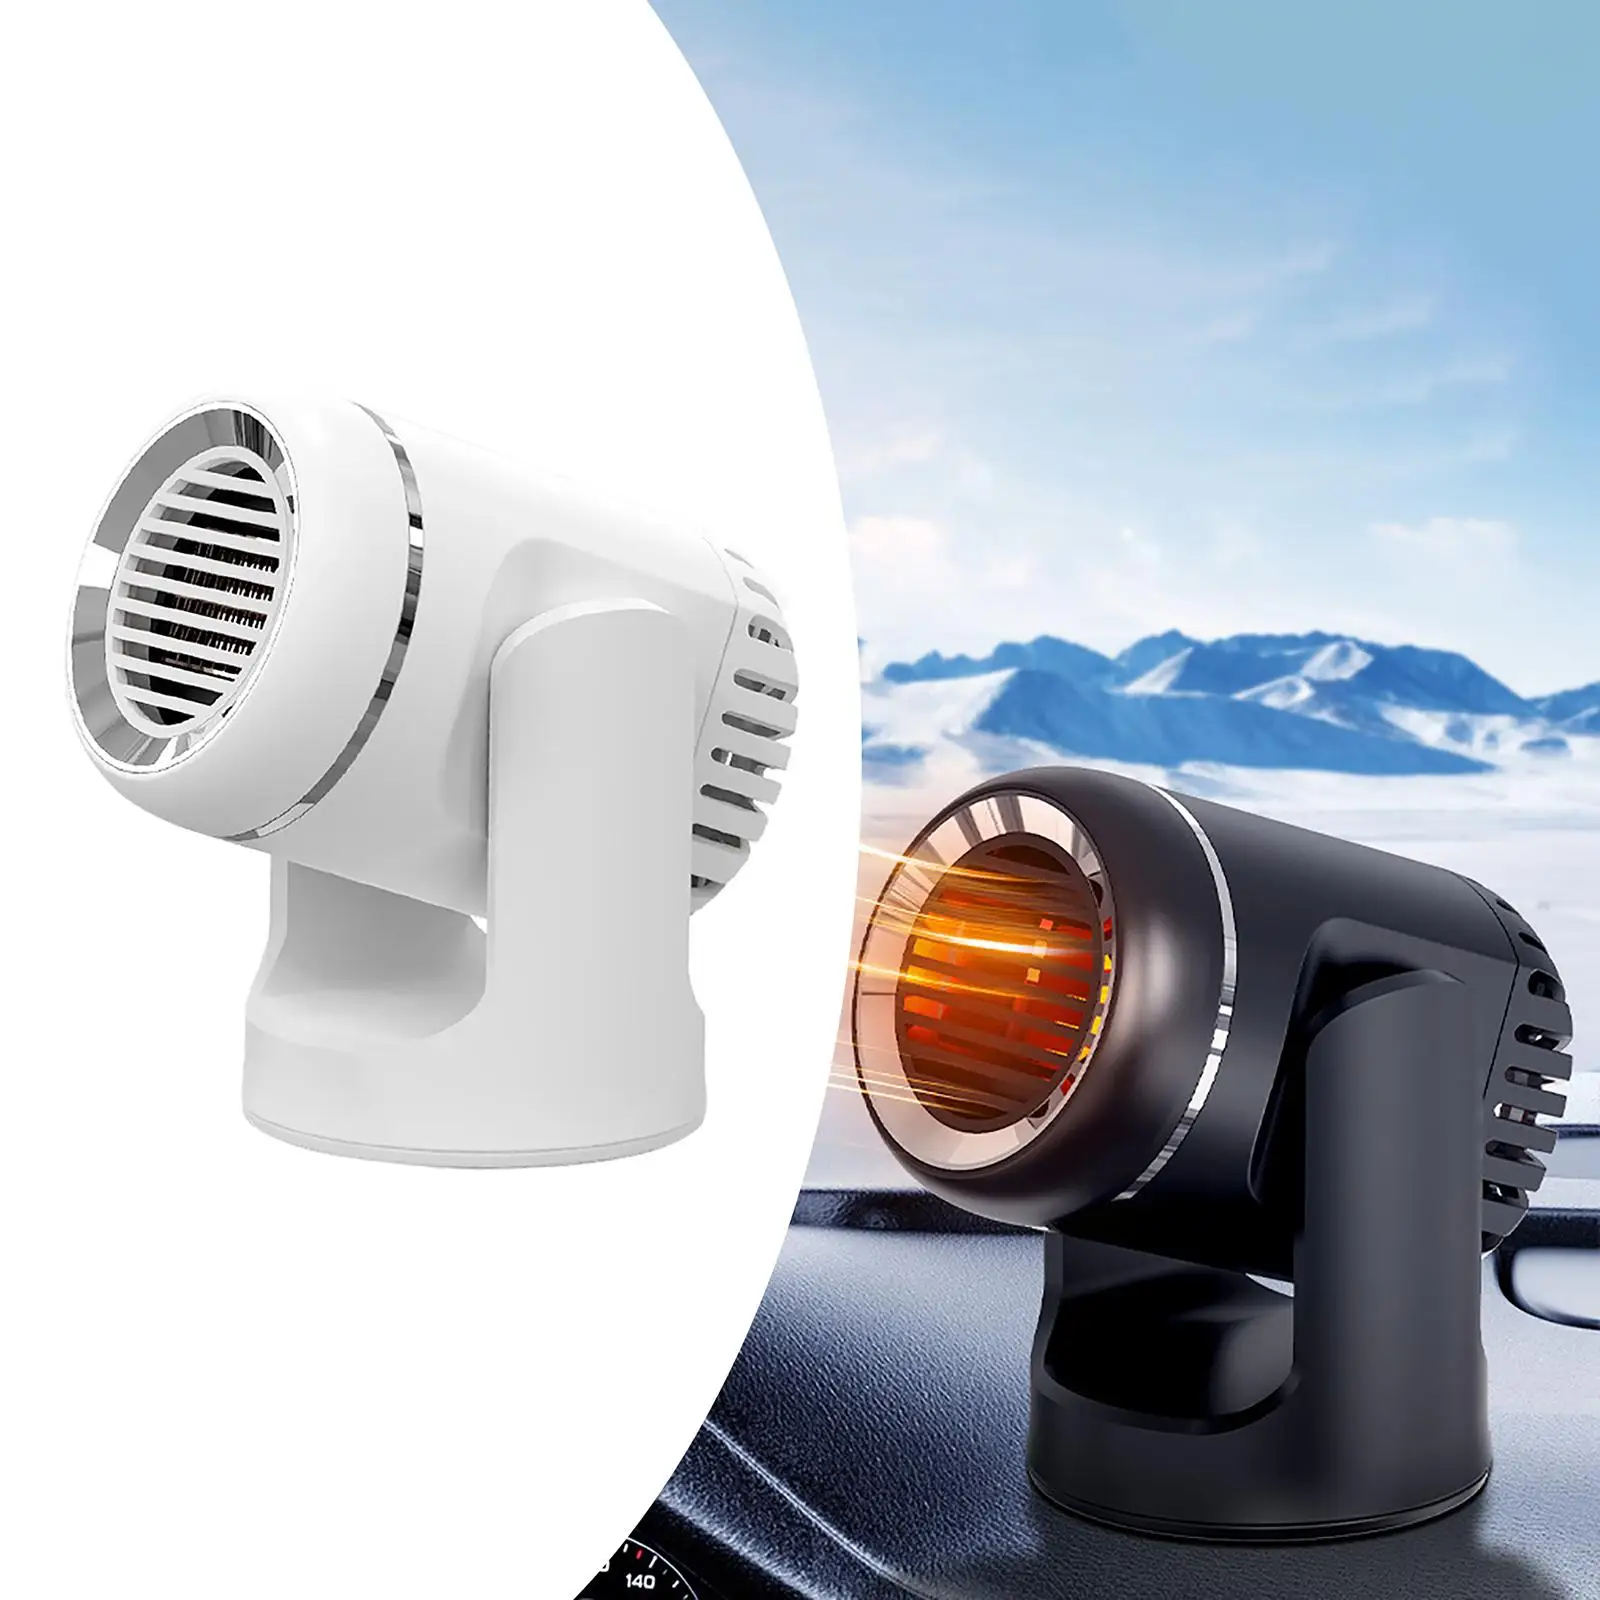 2x 24v Car Heater Car Warm Air Heater Auto Heater Fit for Winter Vehicle